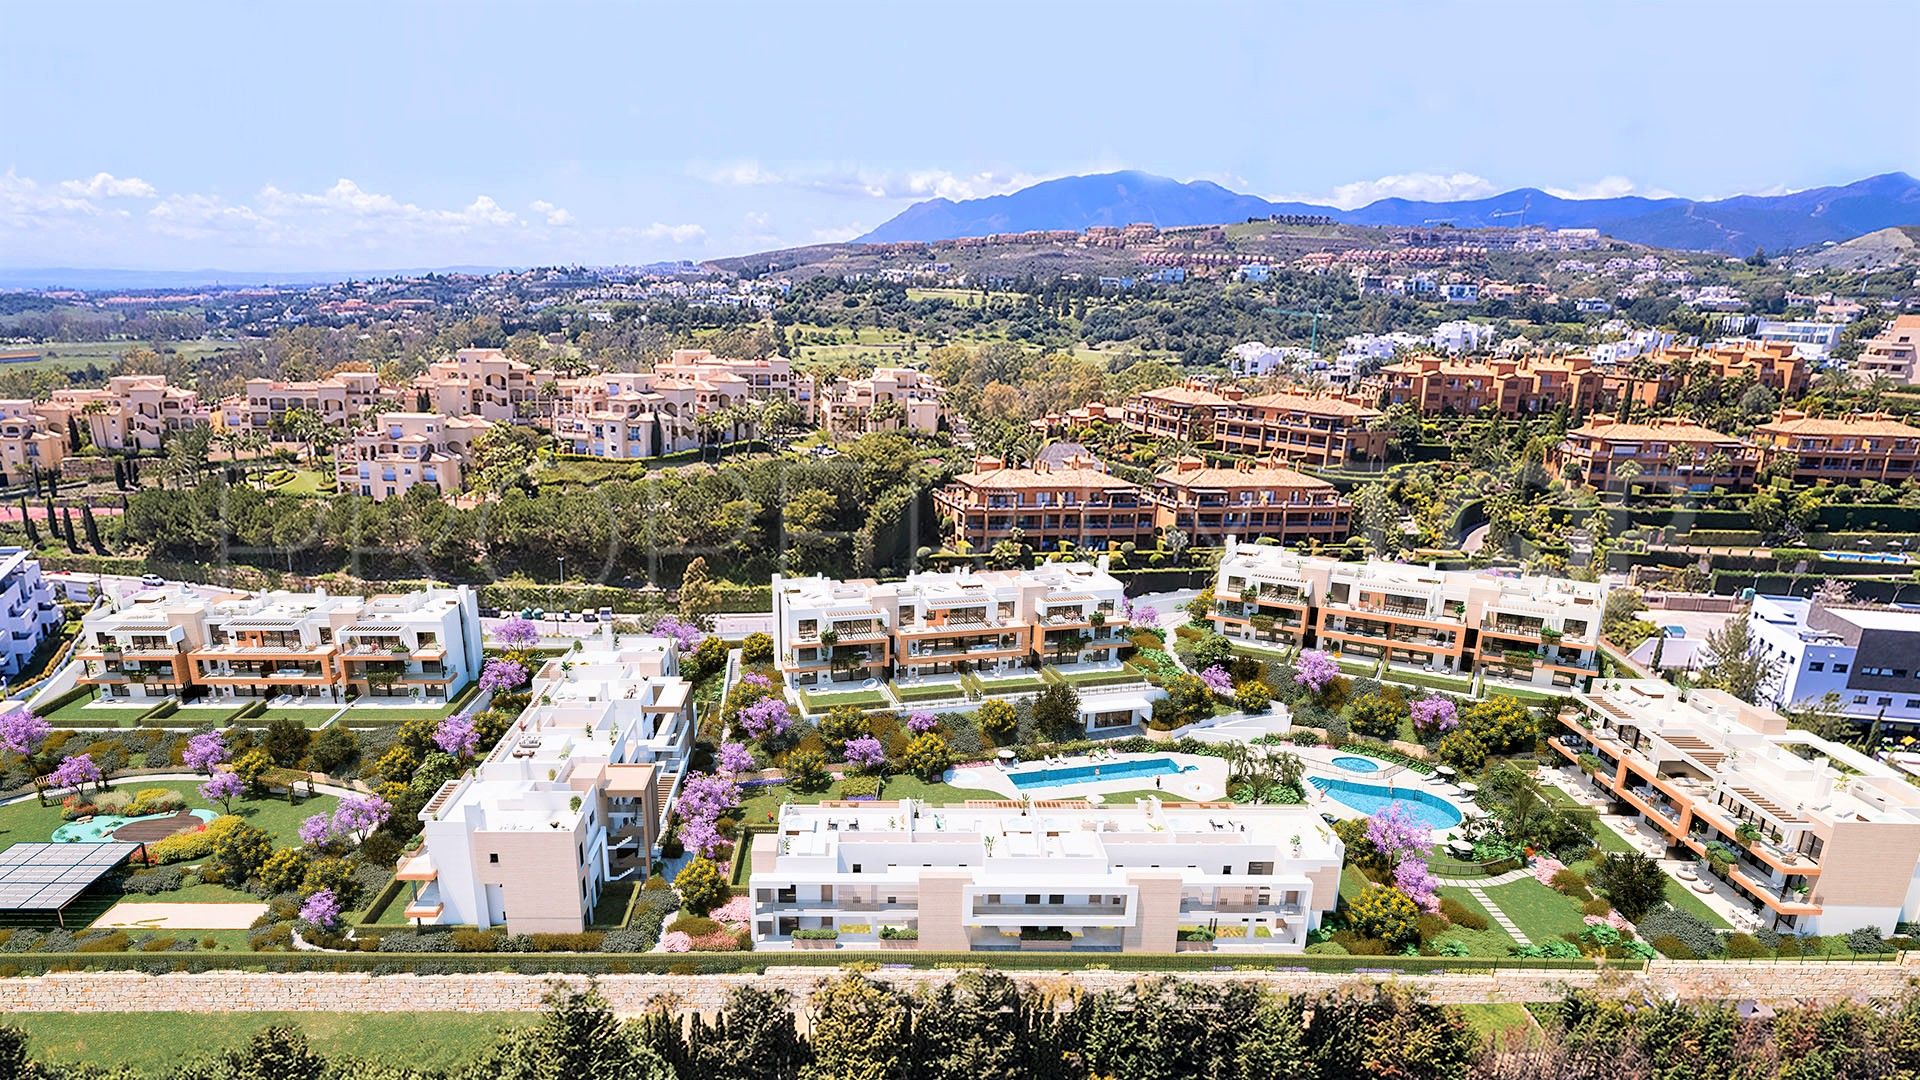 3 bedrooms duplex penthouse in Atalaya for sale